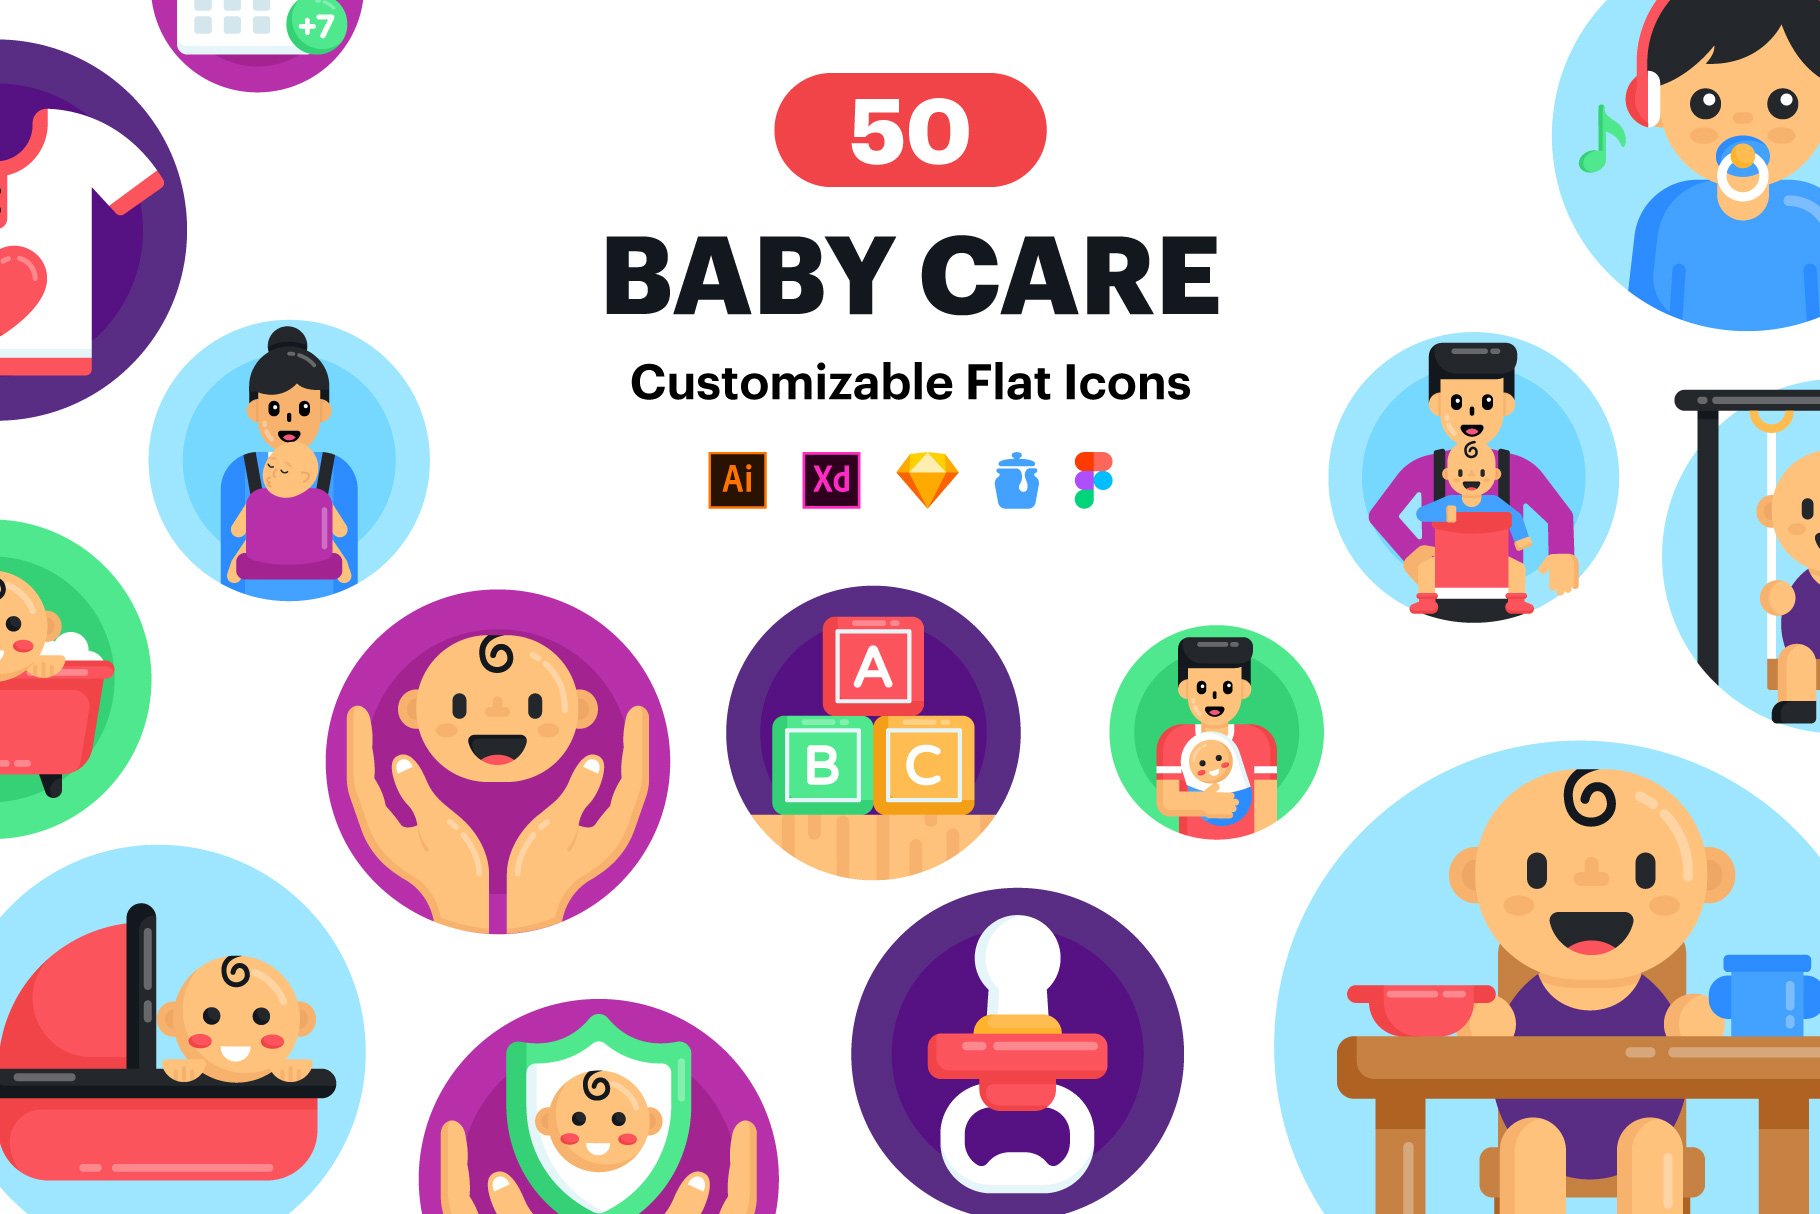 Baby Care Icons - 50 Round Vectors cover image.